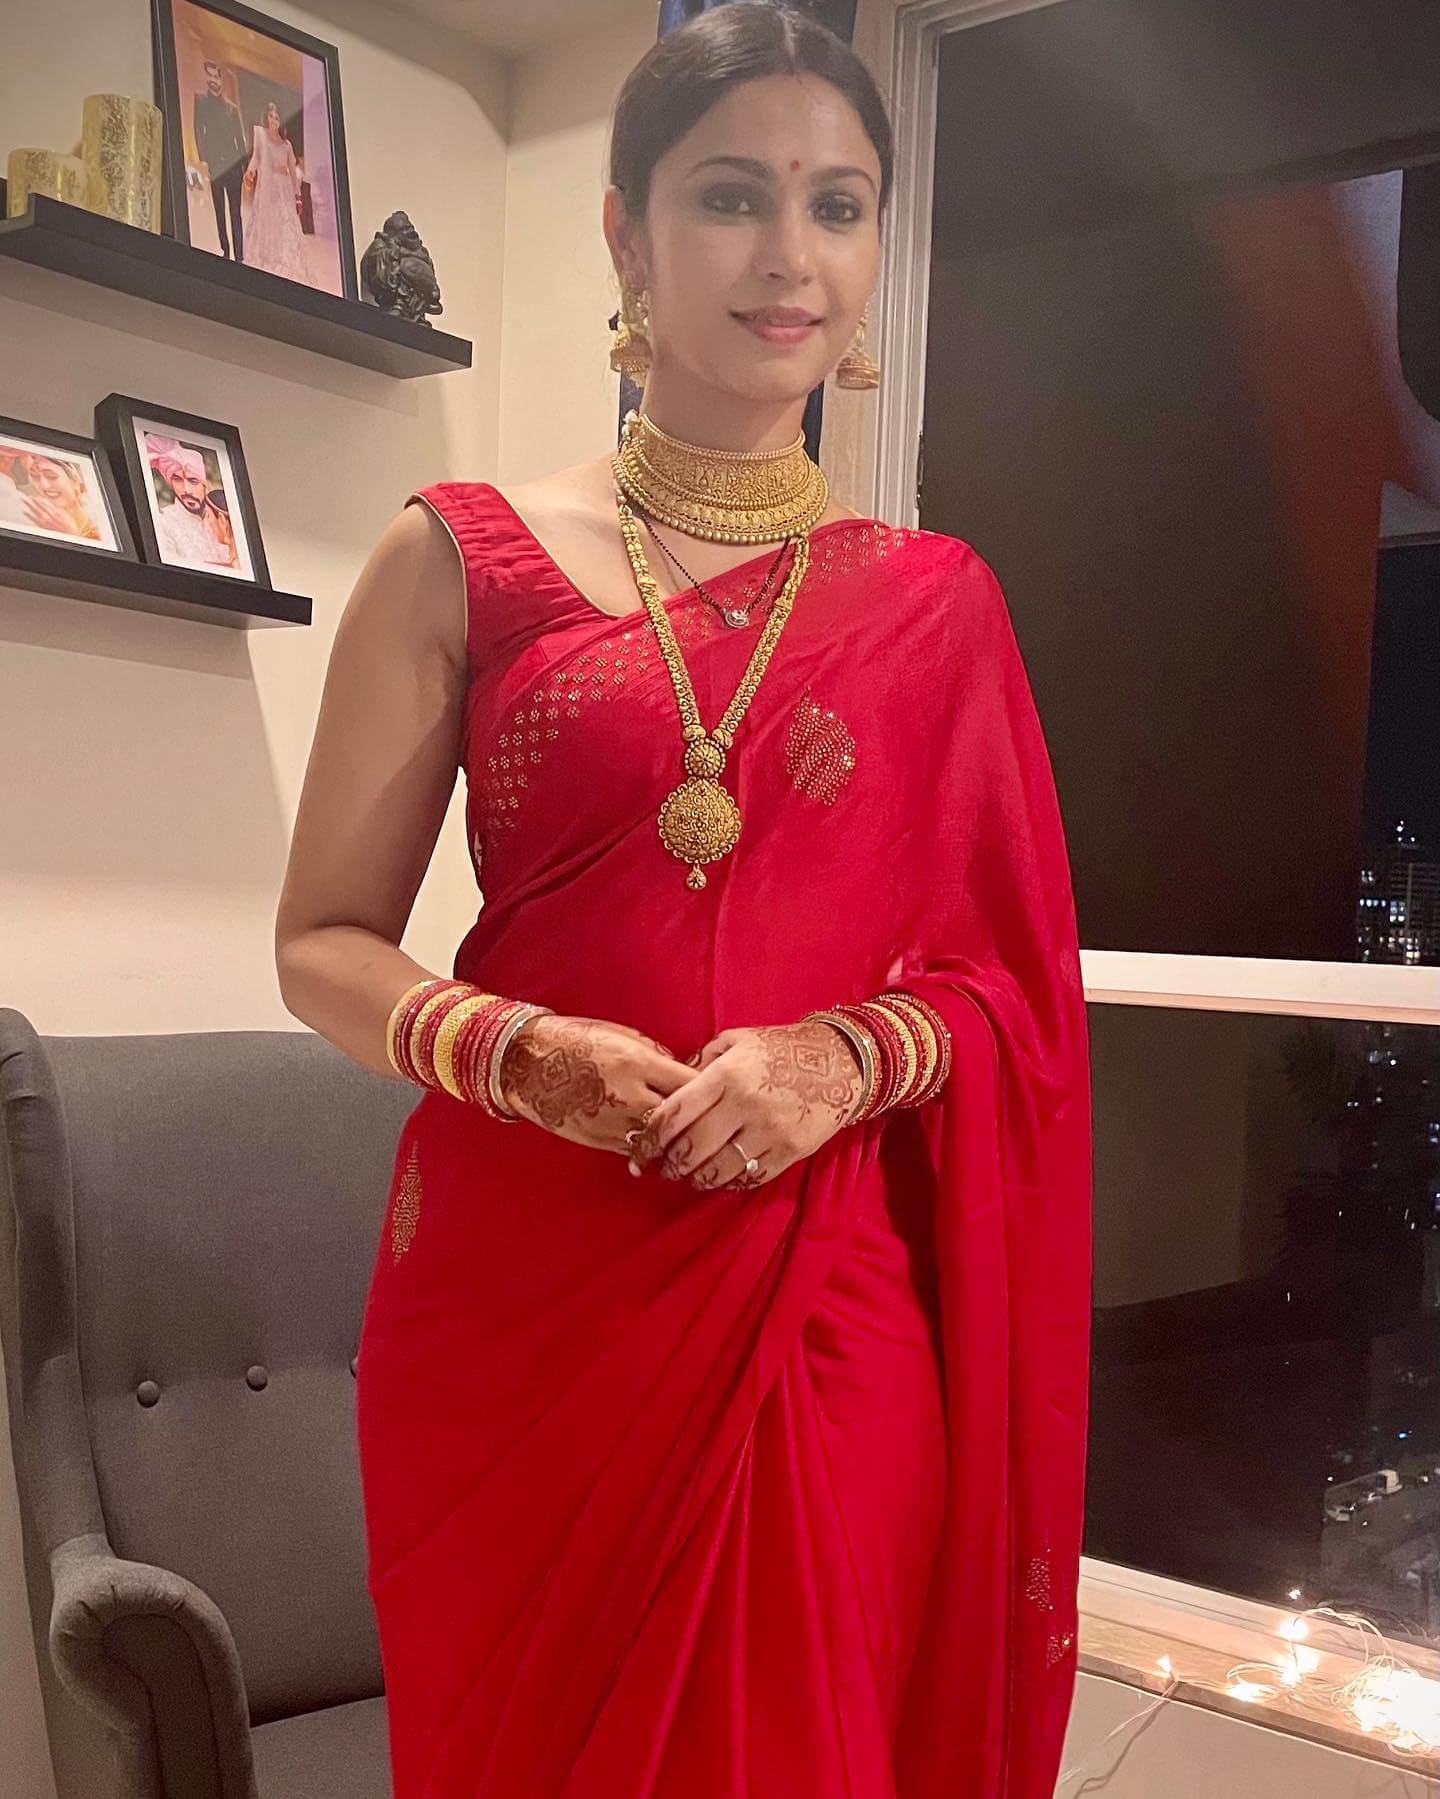 Shamata Anchan Mesmerizing Karva Chauth Look In  Red Stone Embedded Saree With Sleeveless Red Blouse Paired With Heavy Gold Jewellery